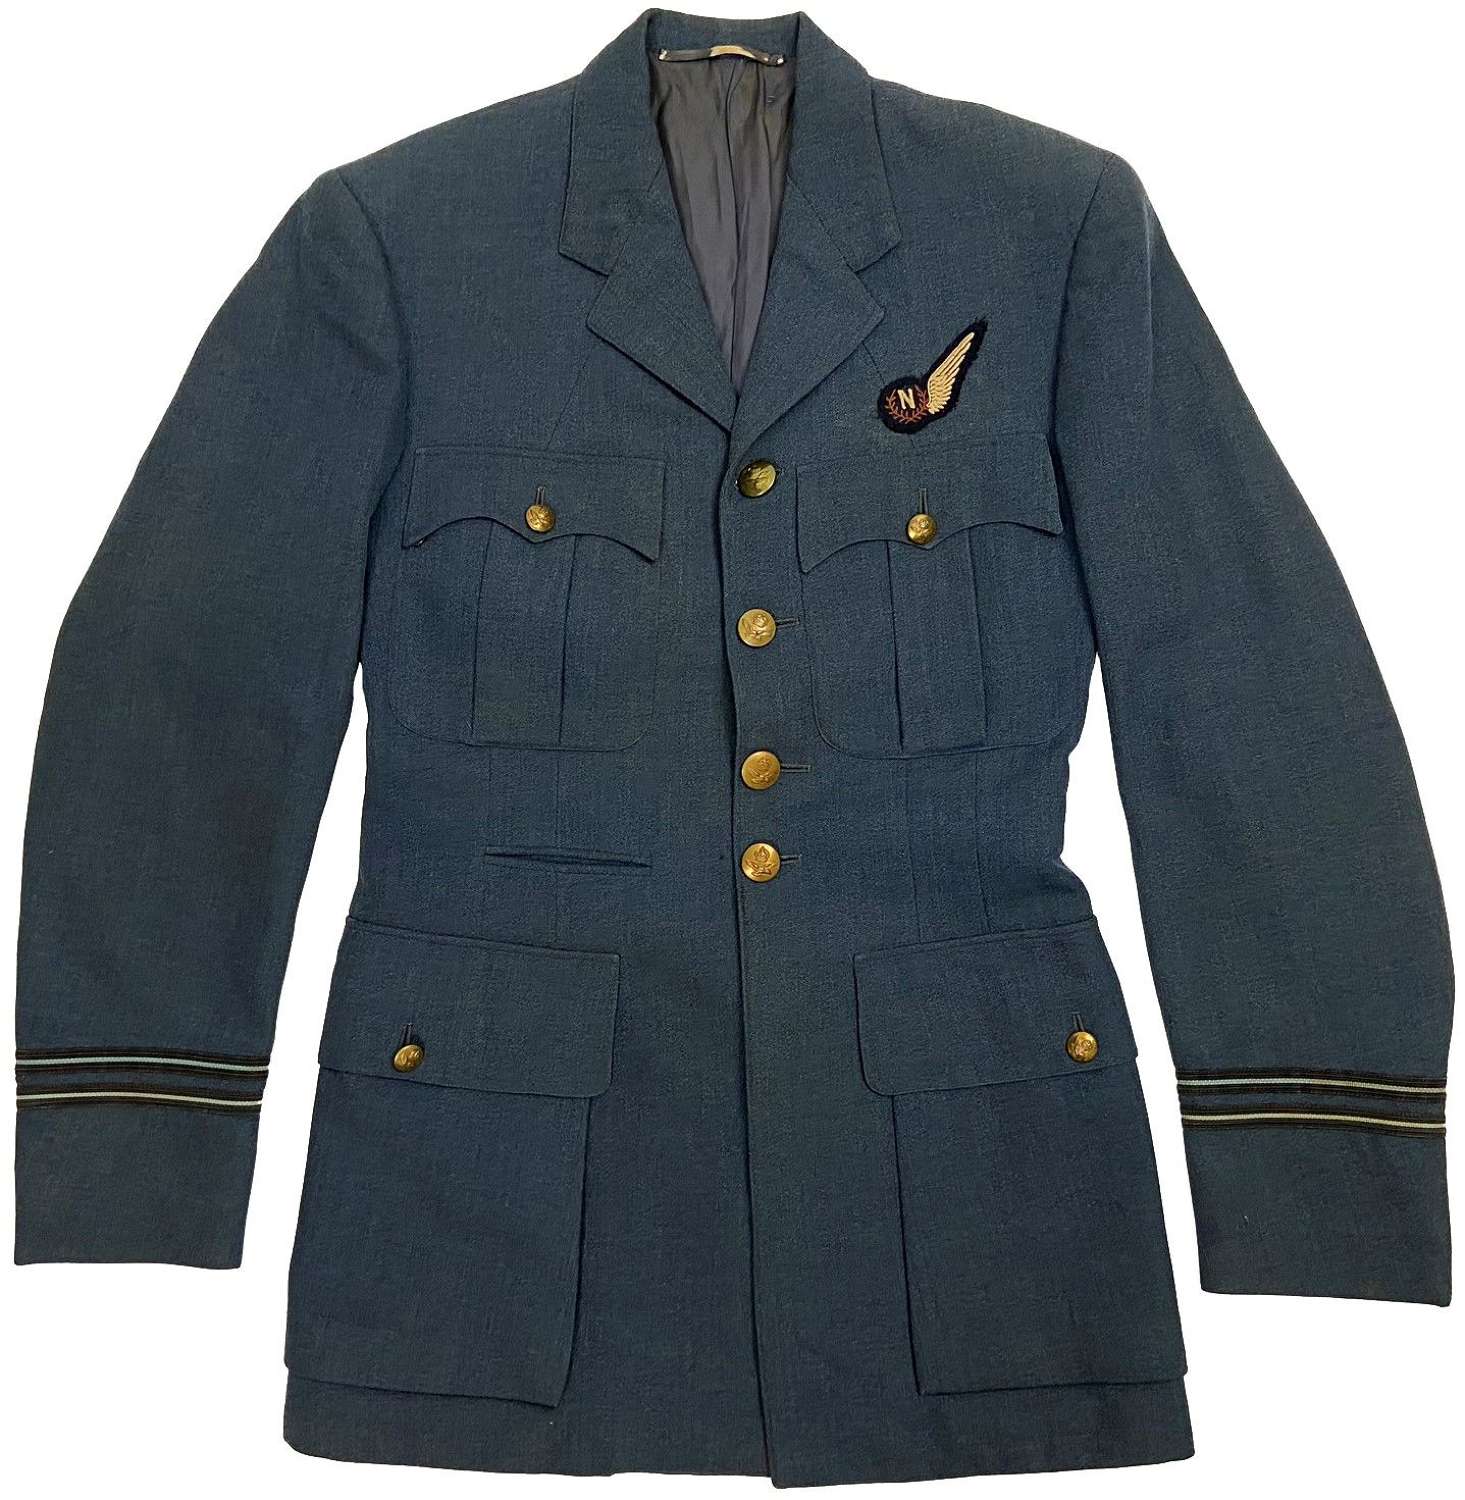 Original 1953 Dated RAF Officers Tunic with Navigator Brevet